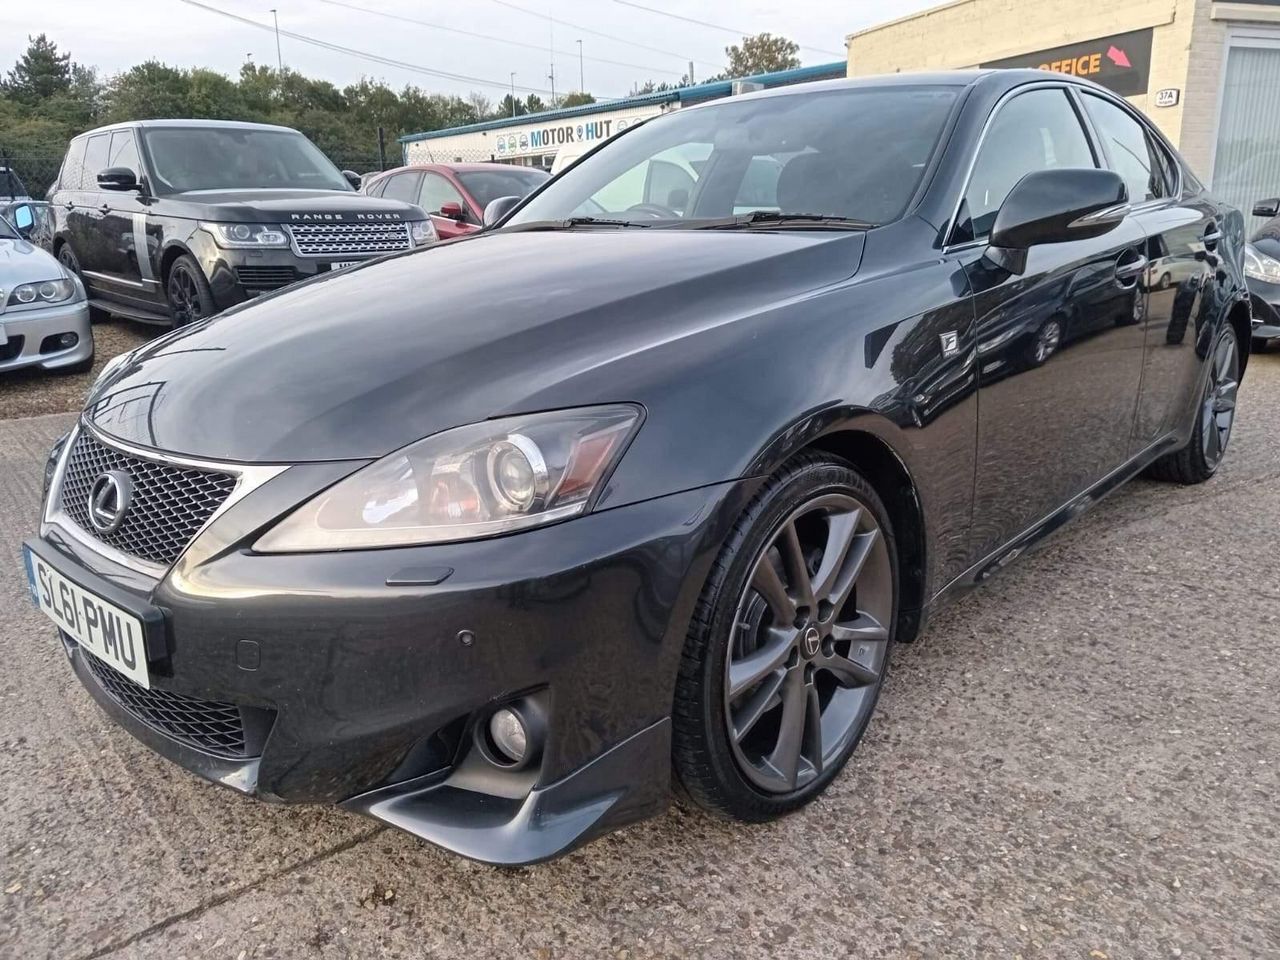 2011 Lexus IS 250 2.5 V6 F Sport Auto Euro 5 4dr - Picture 5 of 32